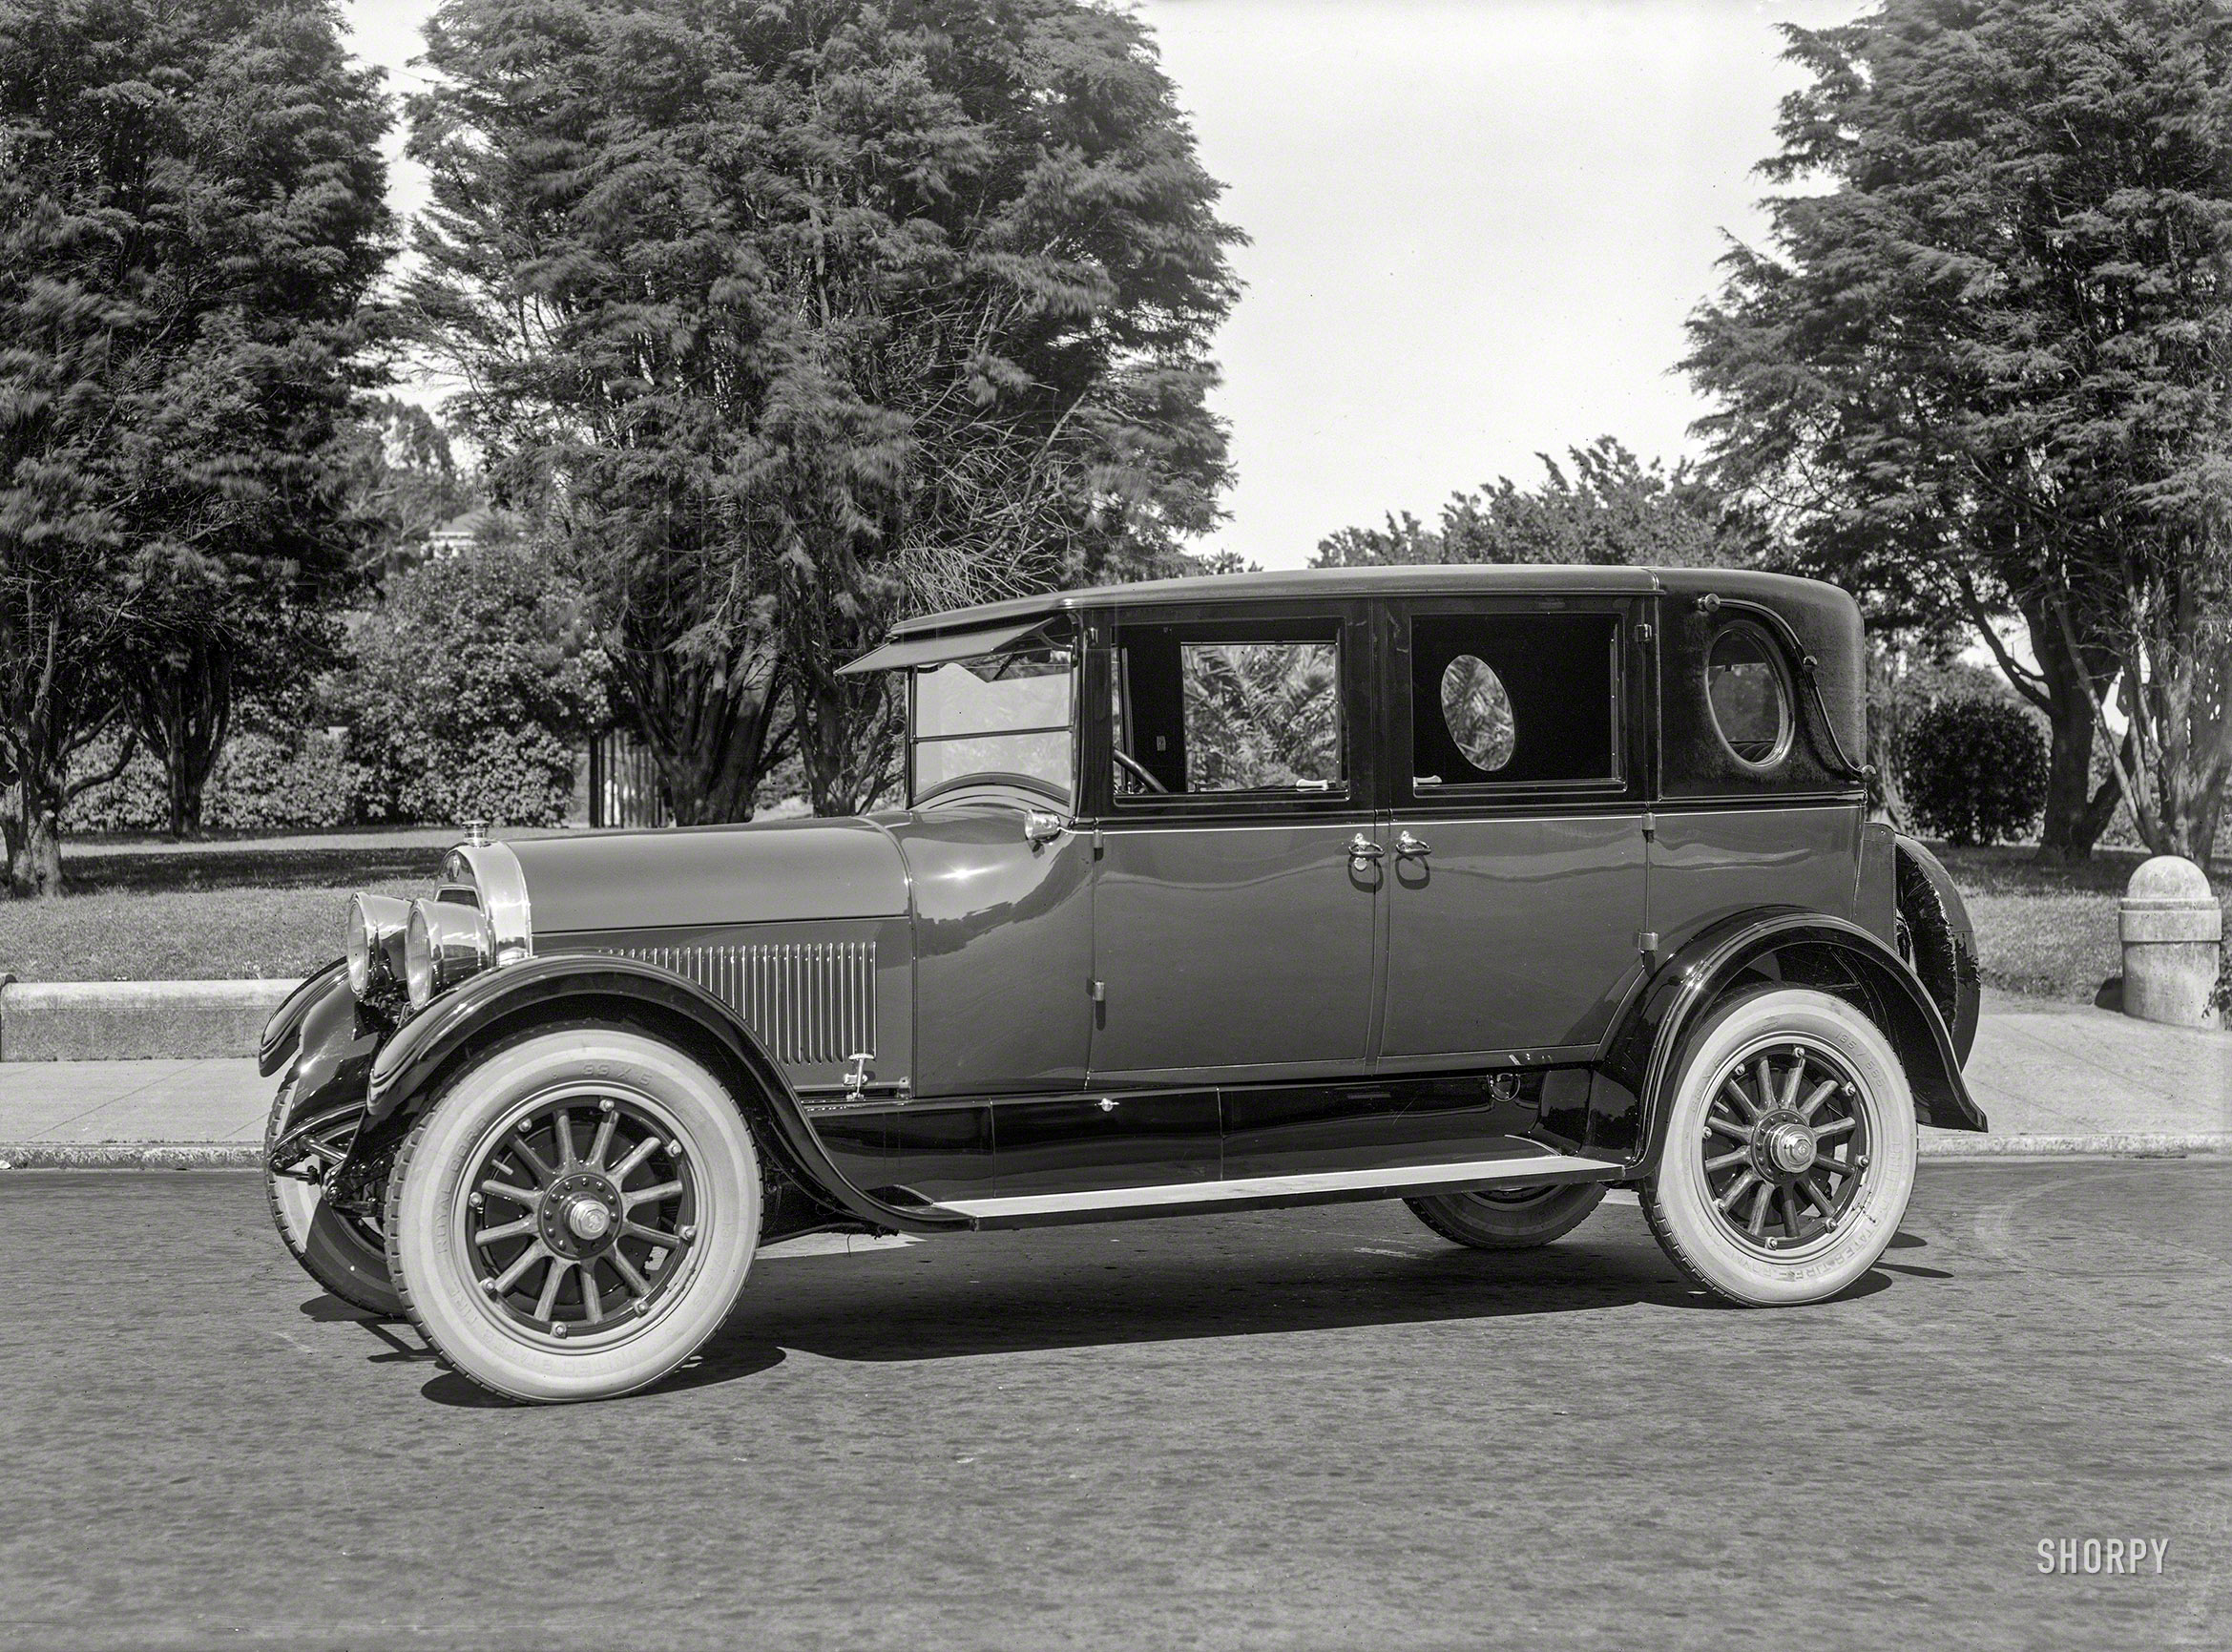 &nbsp; &nbsp; &nbsp; &nbsp; Among the first Cadillacs to have brakes on all four wheels.
San Francisco circa 1925. "Cadillac V63 five-passenger sedan at Lafayette Park." 5x7 inch dry-plate glass negative by Christopher Helin. View full size.